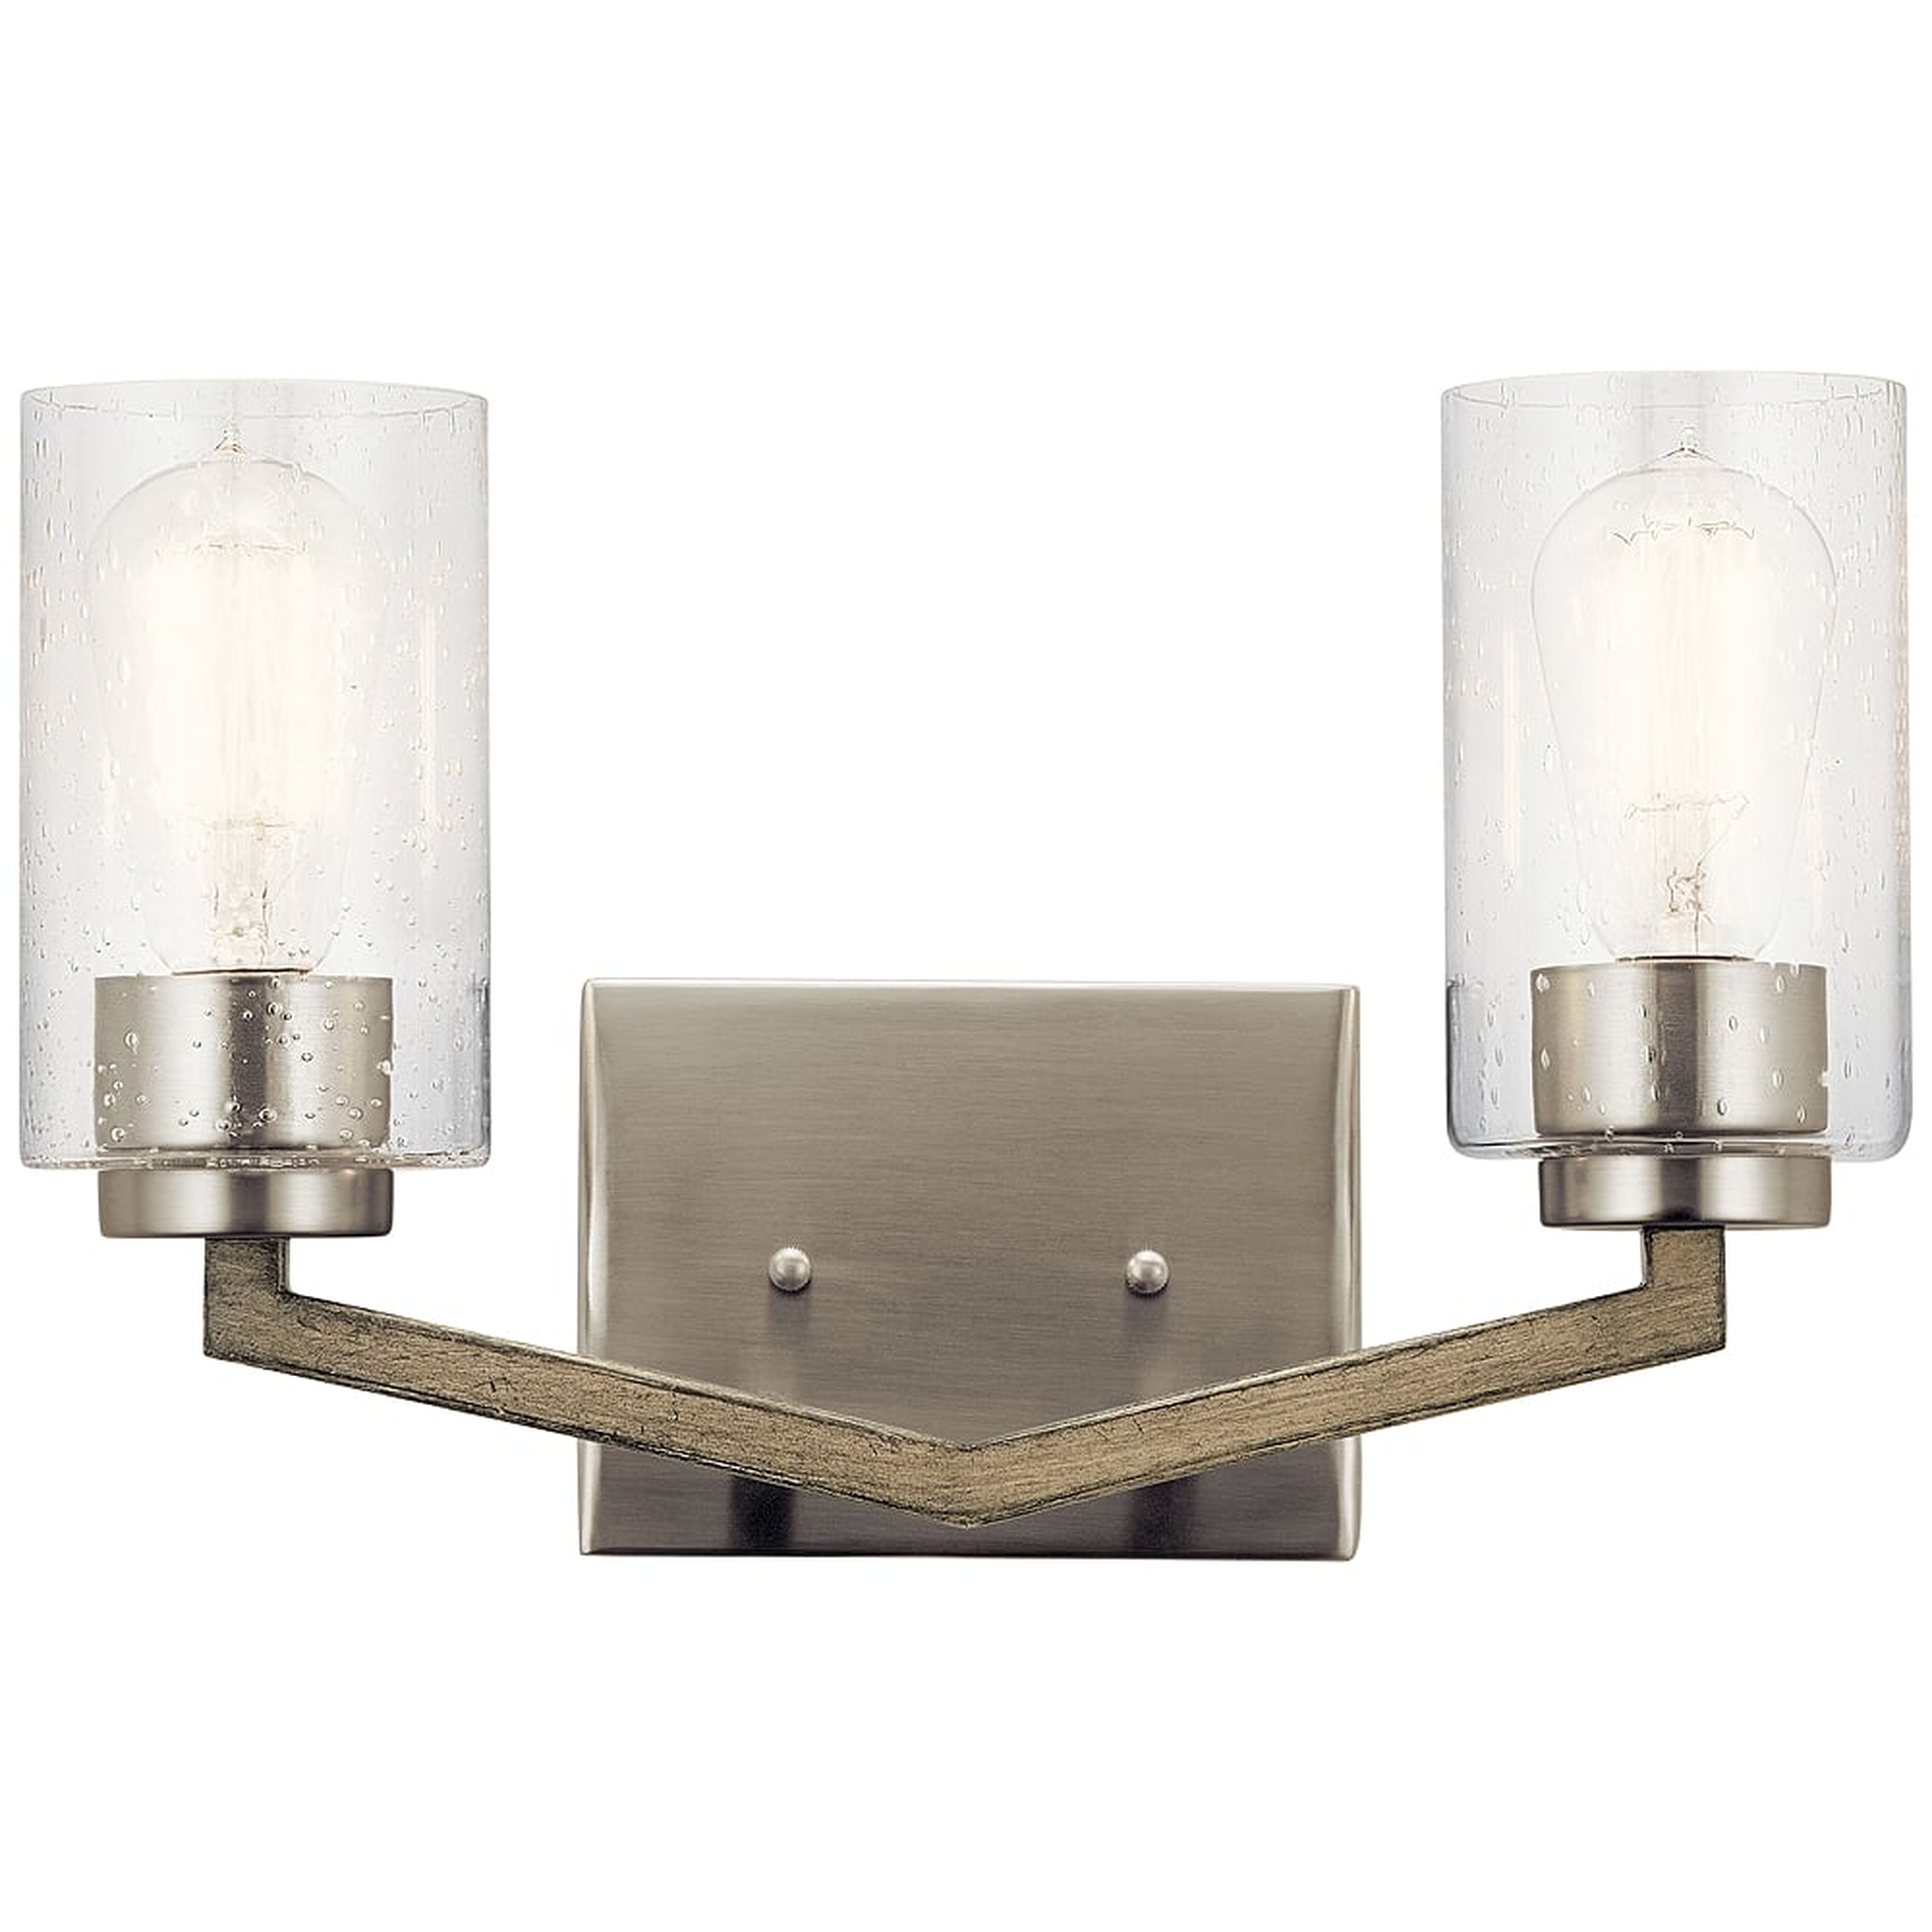 Deryn 9" High Distressed Antique Gray 2-Light Wall Sconce - Style # 76D85 - Lamps Plus